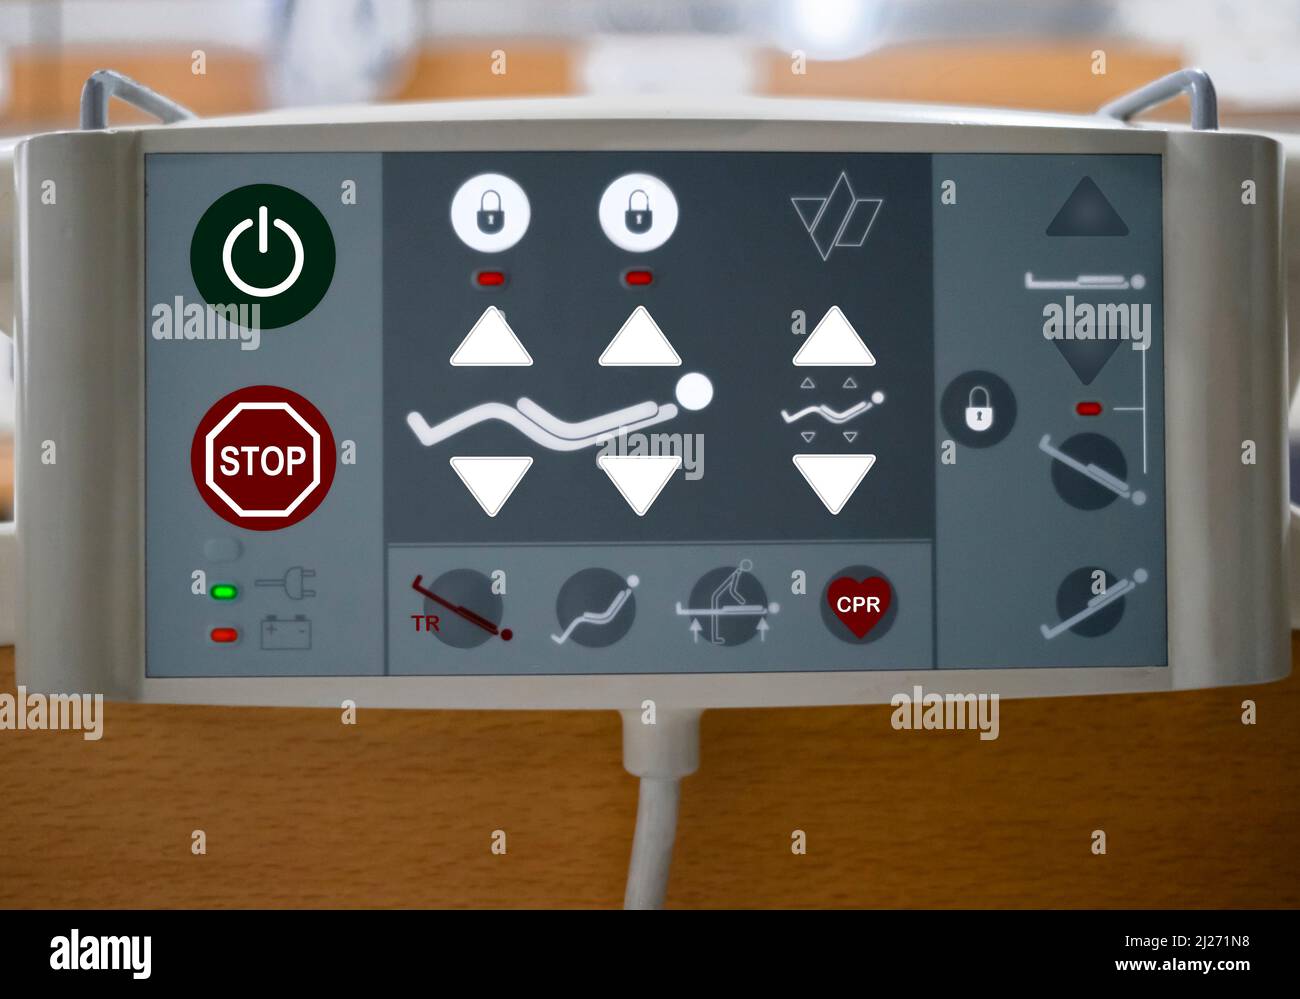 adjustable Hospital bed remote control panel. icons and buttons. Selective Focus panel. Stock Photo